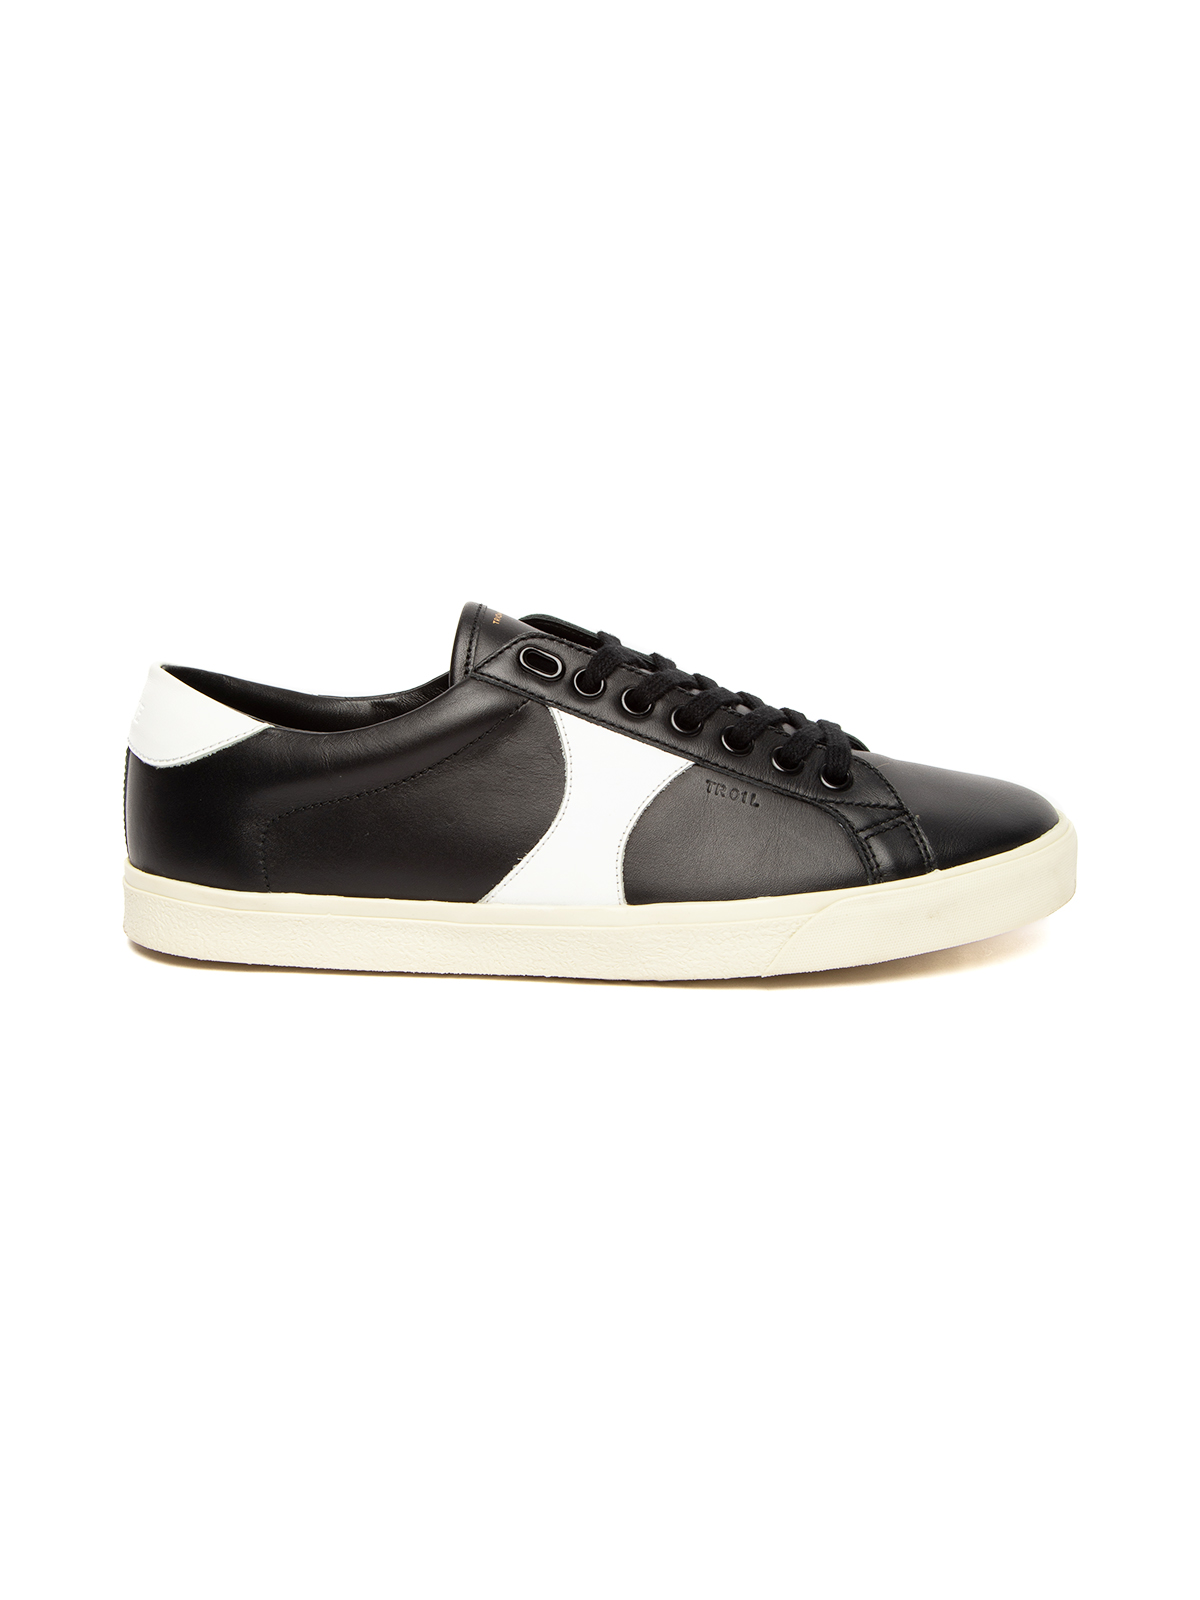 Céline Triomphe Low Top Leather Triainers